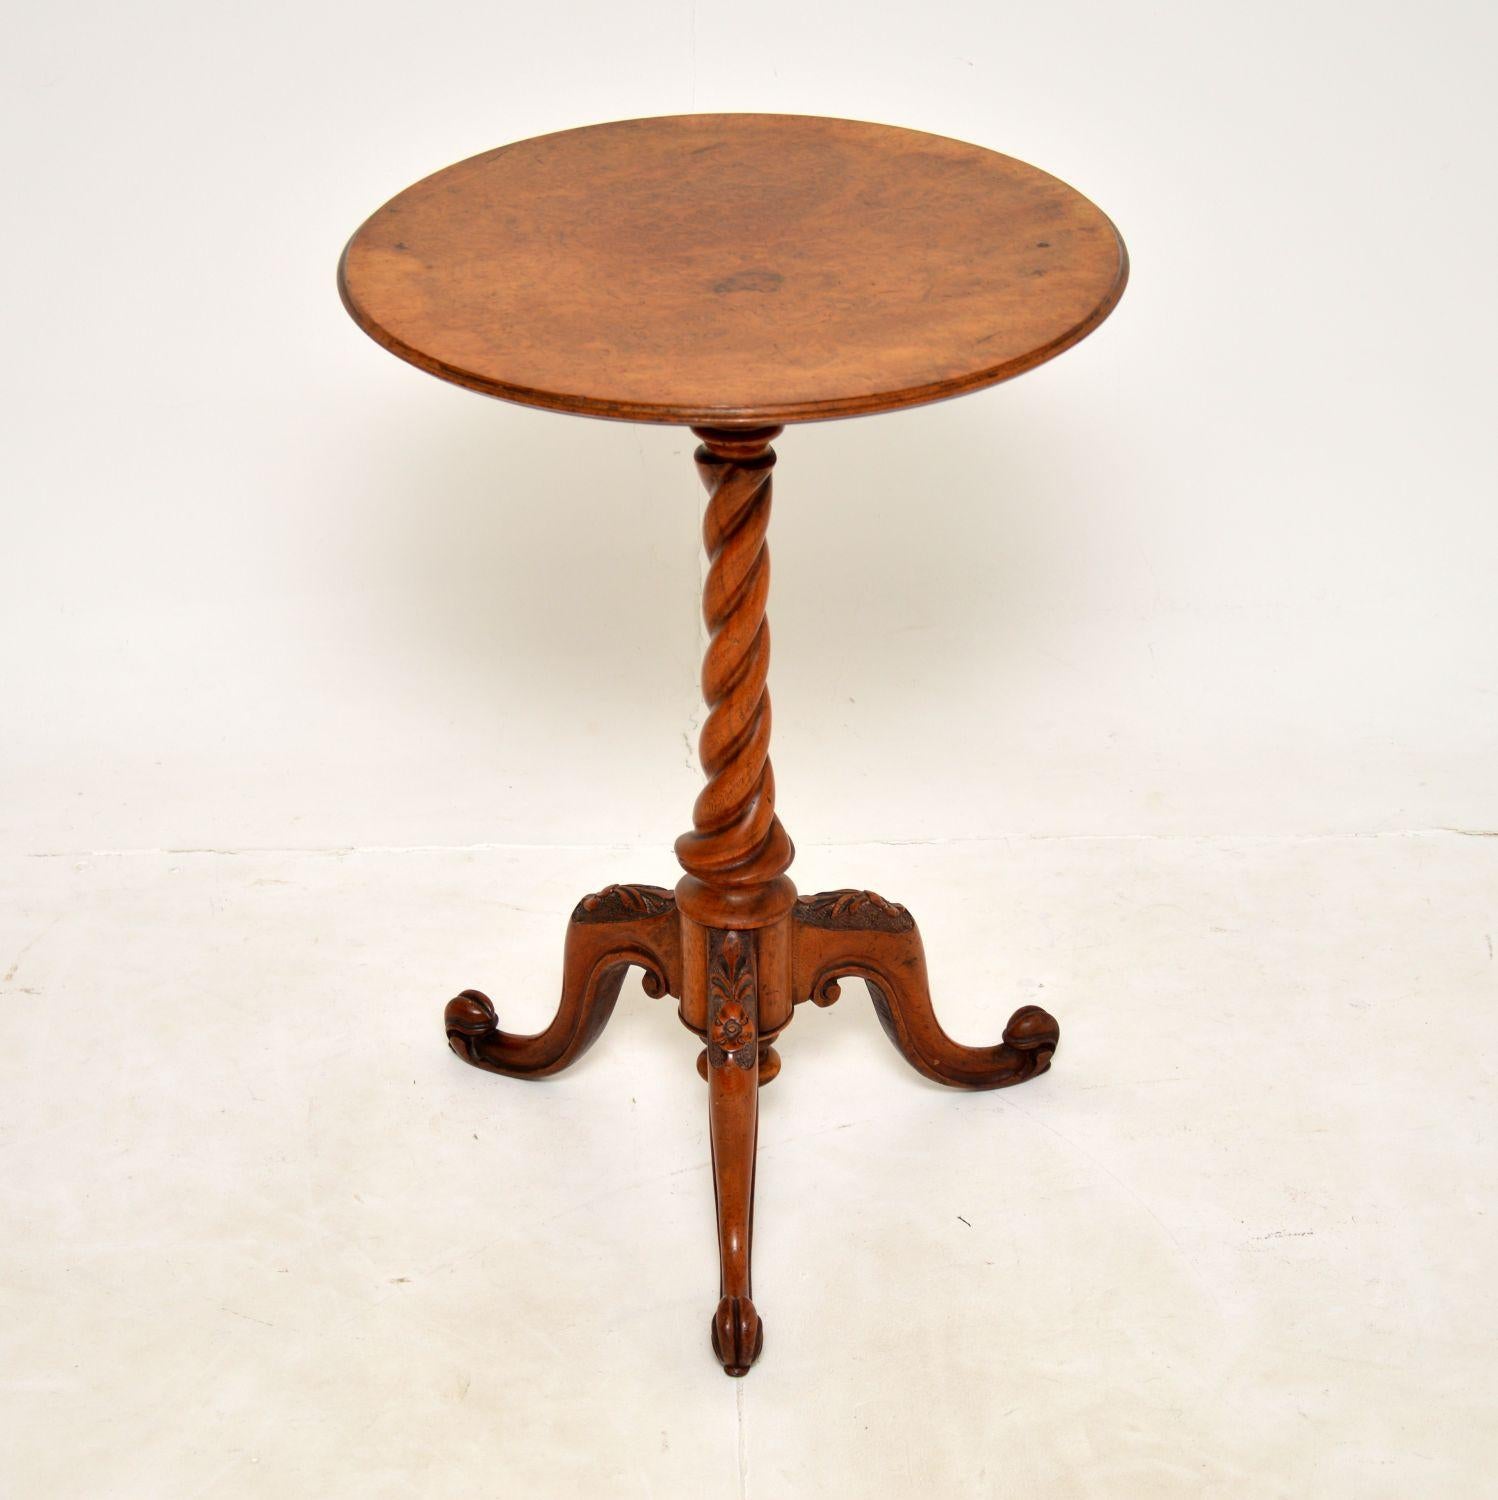 A gorgeous original antique Victorian occasional table in burr walnut. This was made in England, it dates from around the 1860-1880 period.

It has a stunning solid walnut barley twist base with a beautifully carved tripod base. The top has lovely